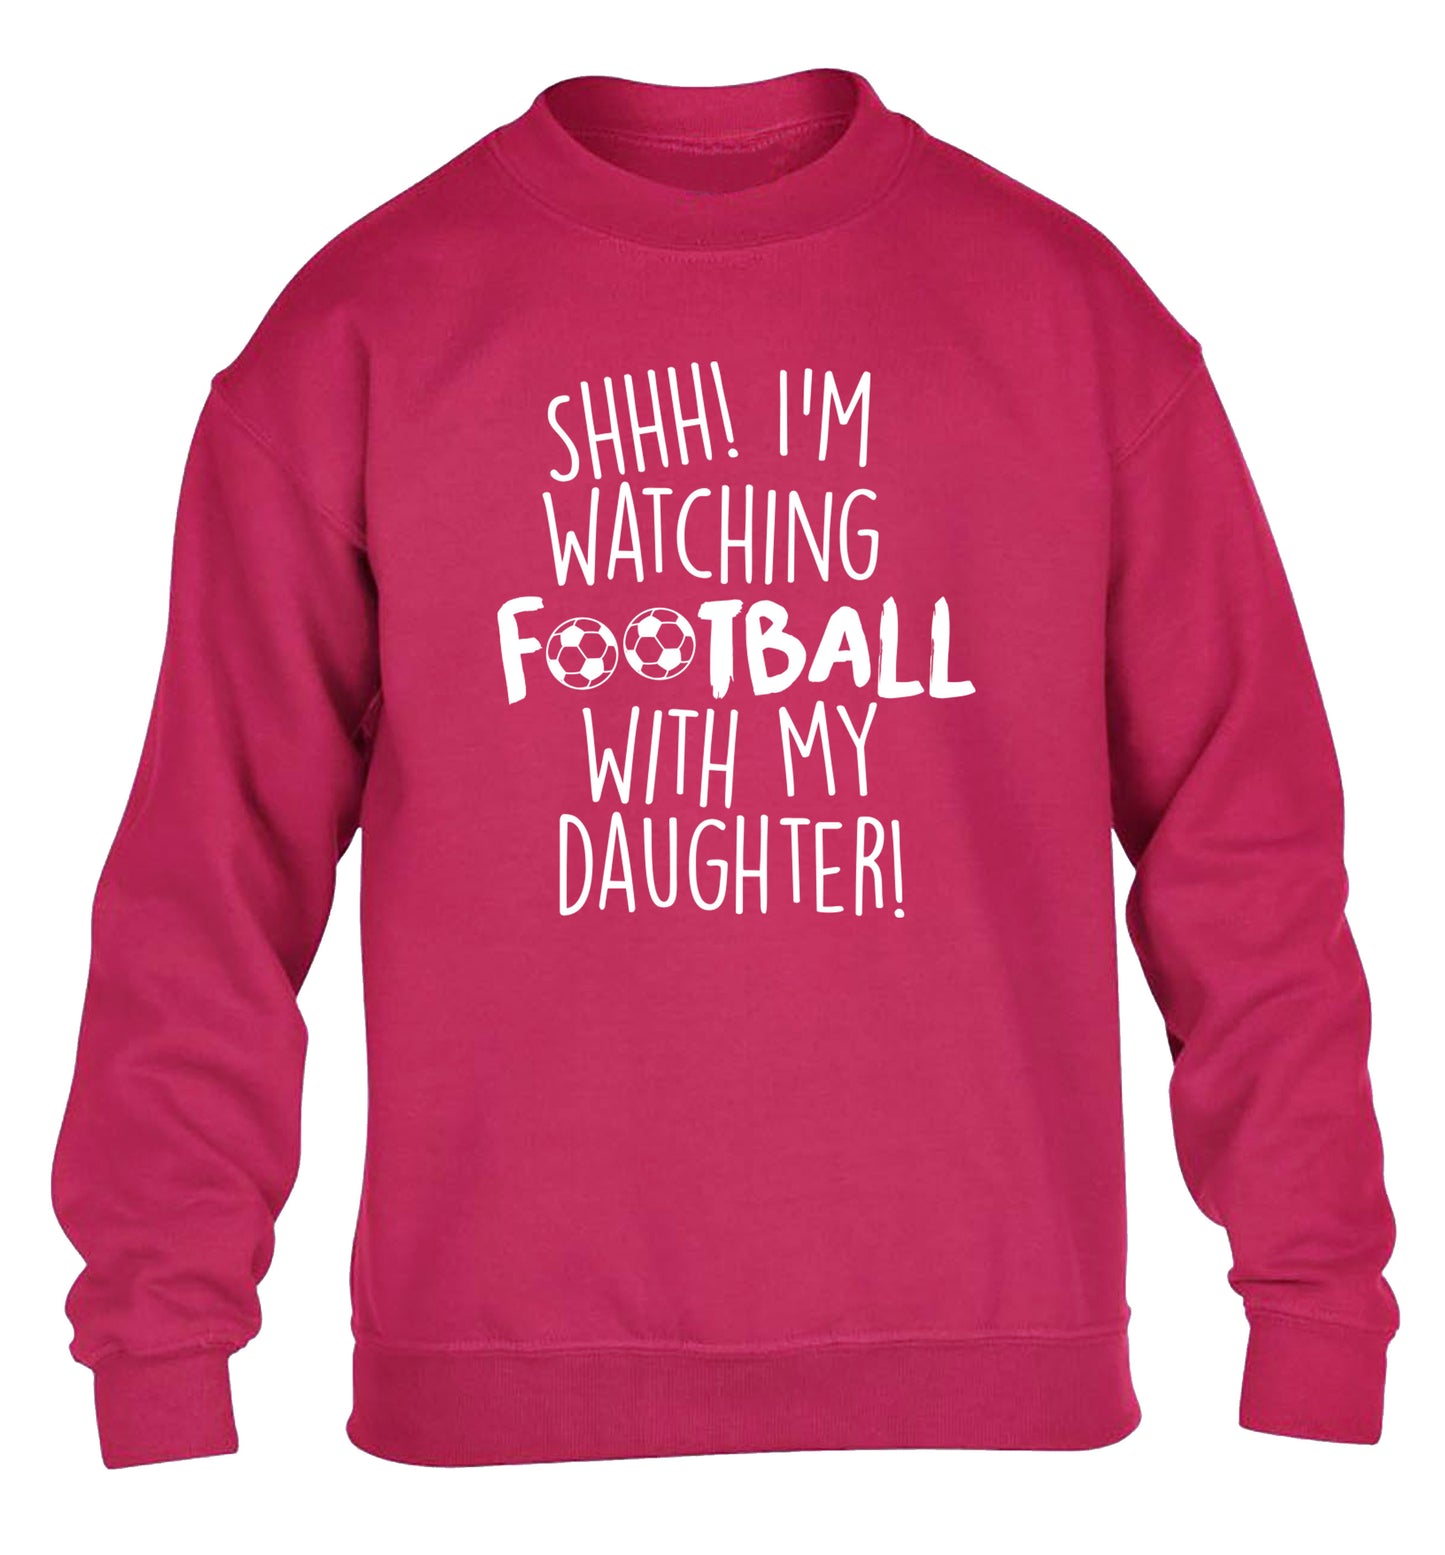 Shhh I'm watching football with my daughter children's pink sweater 12-14 Years